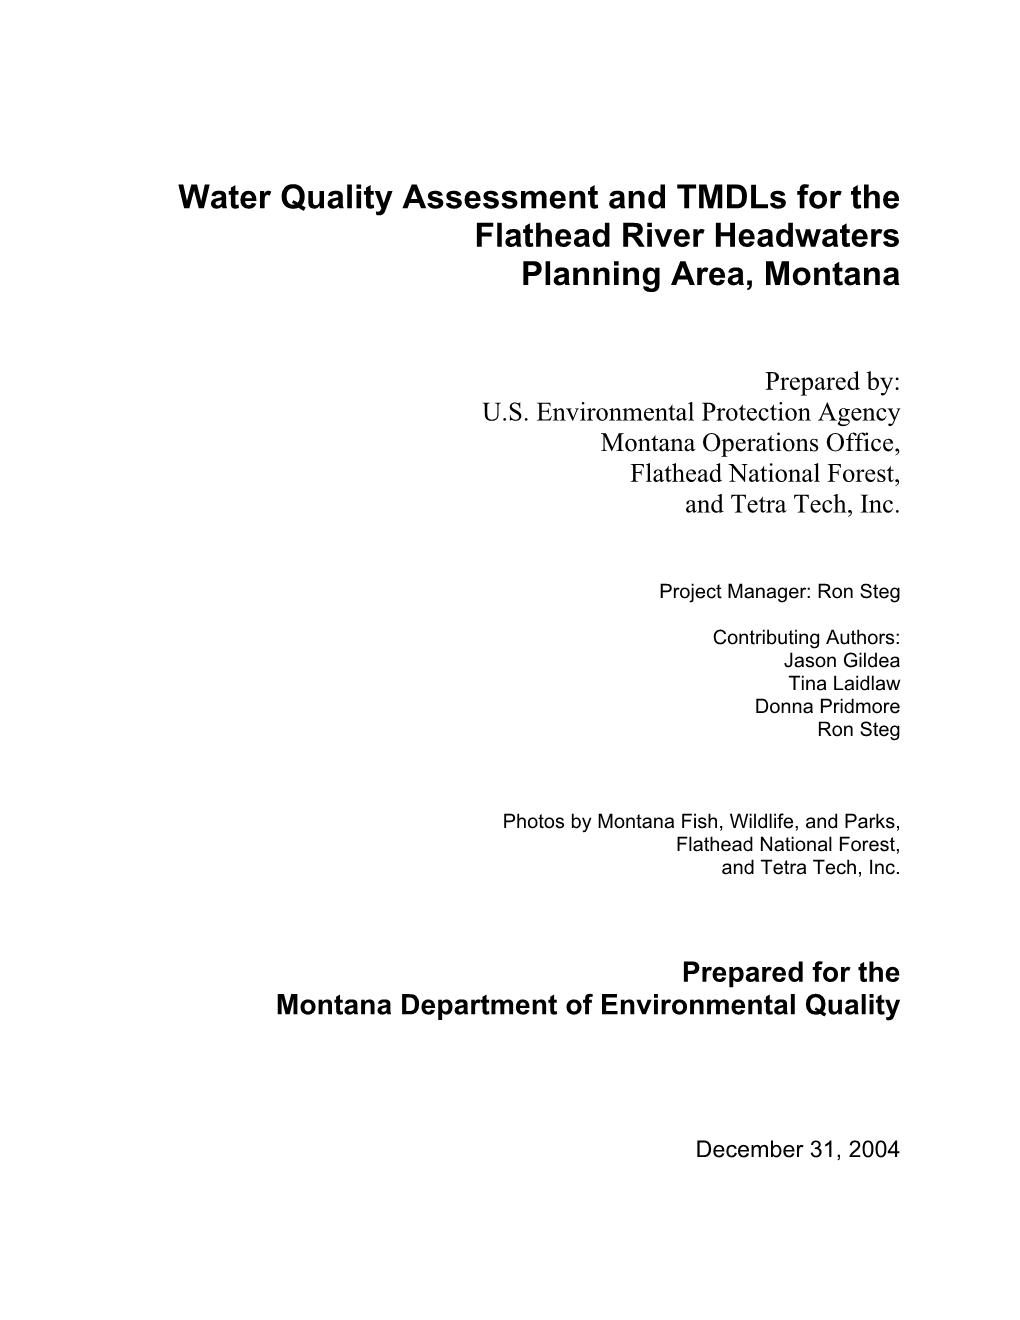 Flathead River Headwaters Water Quality Assessment and Tmdls